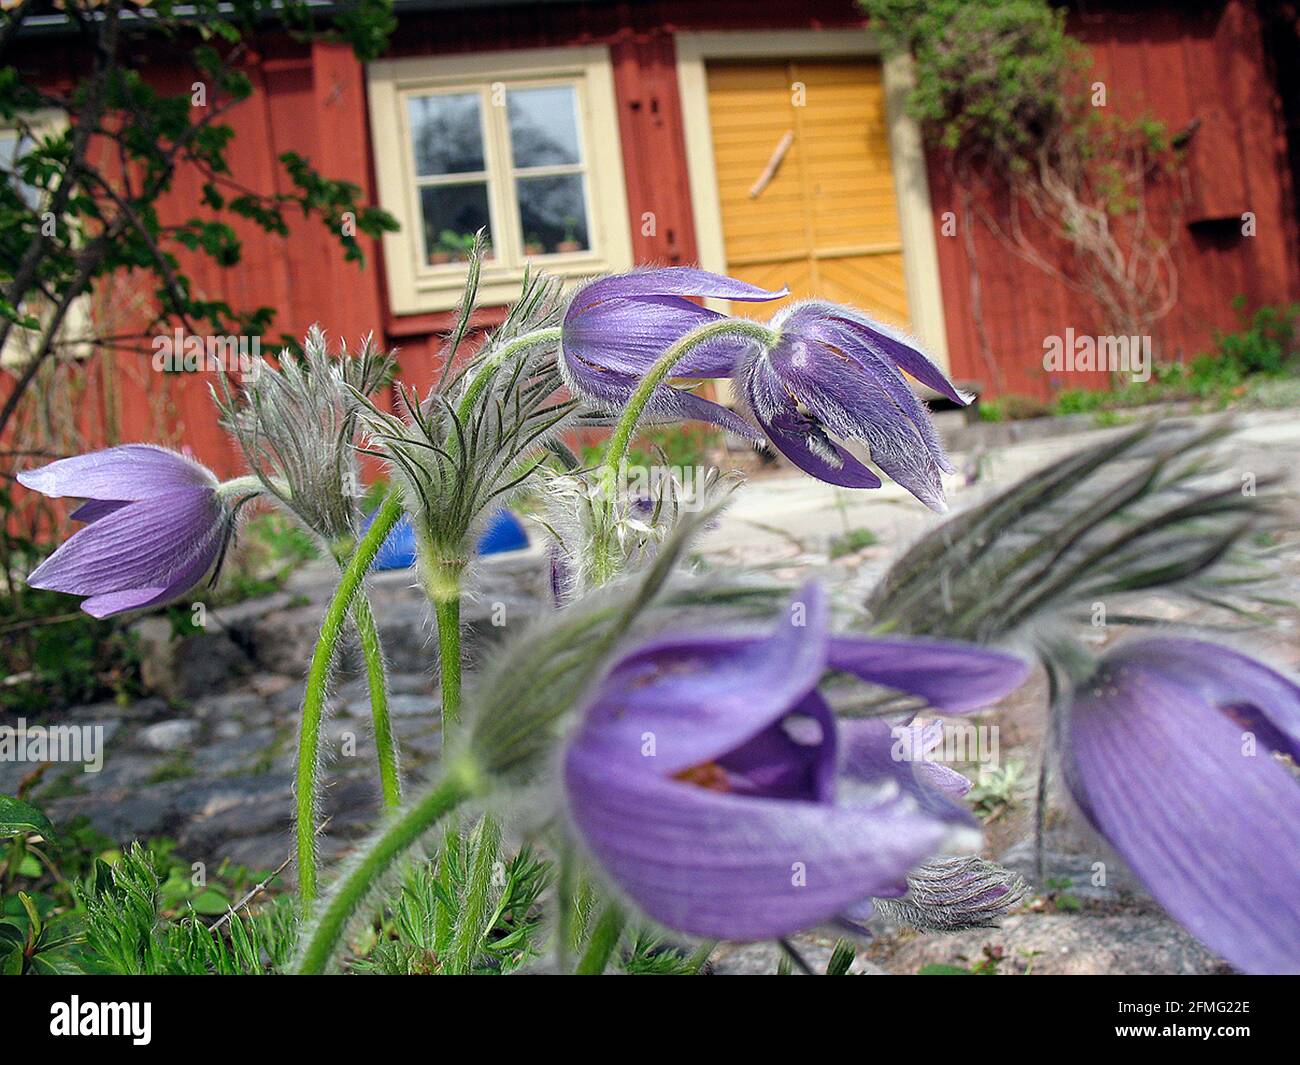 Pasque flower Pulsatilla rubra cluster in full bloom in front of old red house. Stock Photo